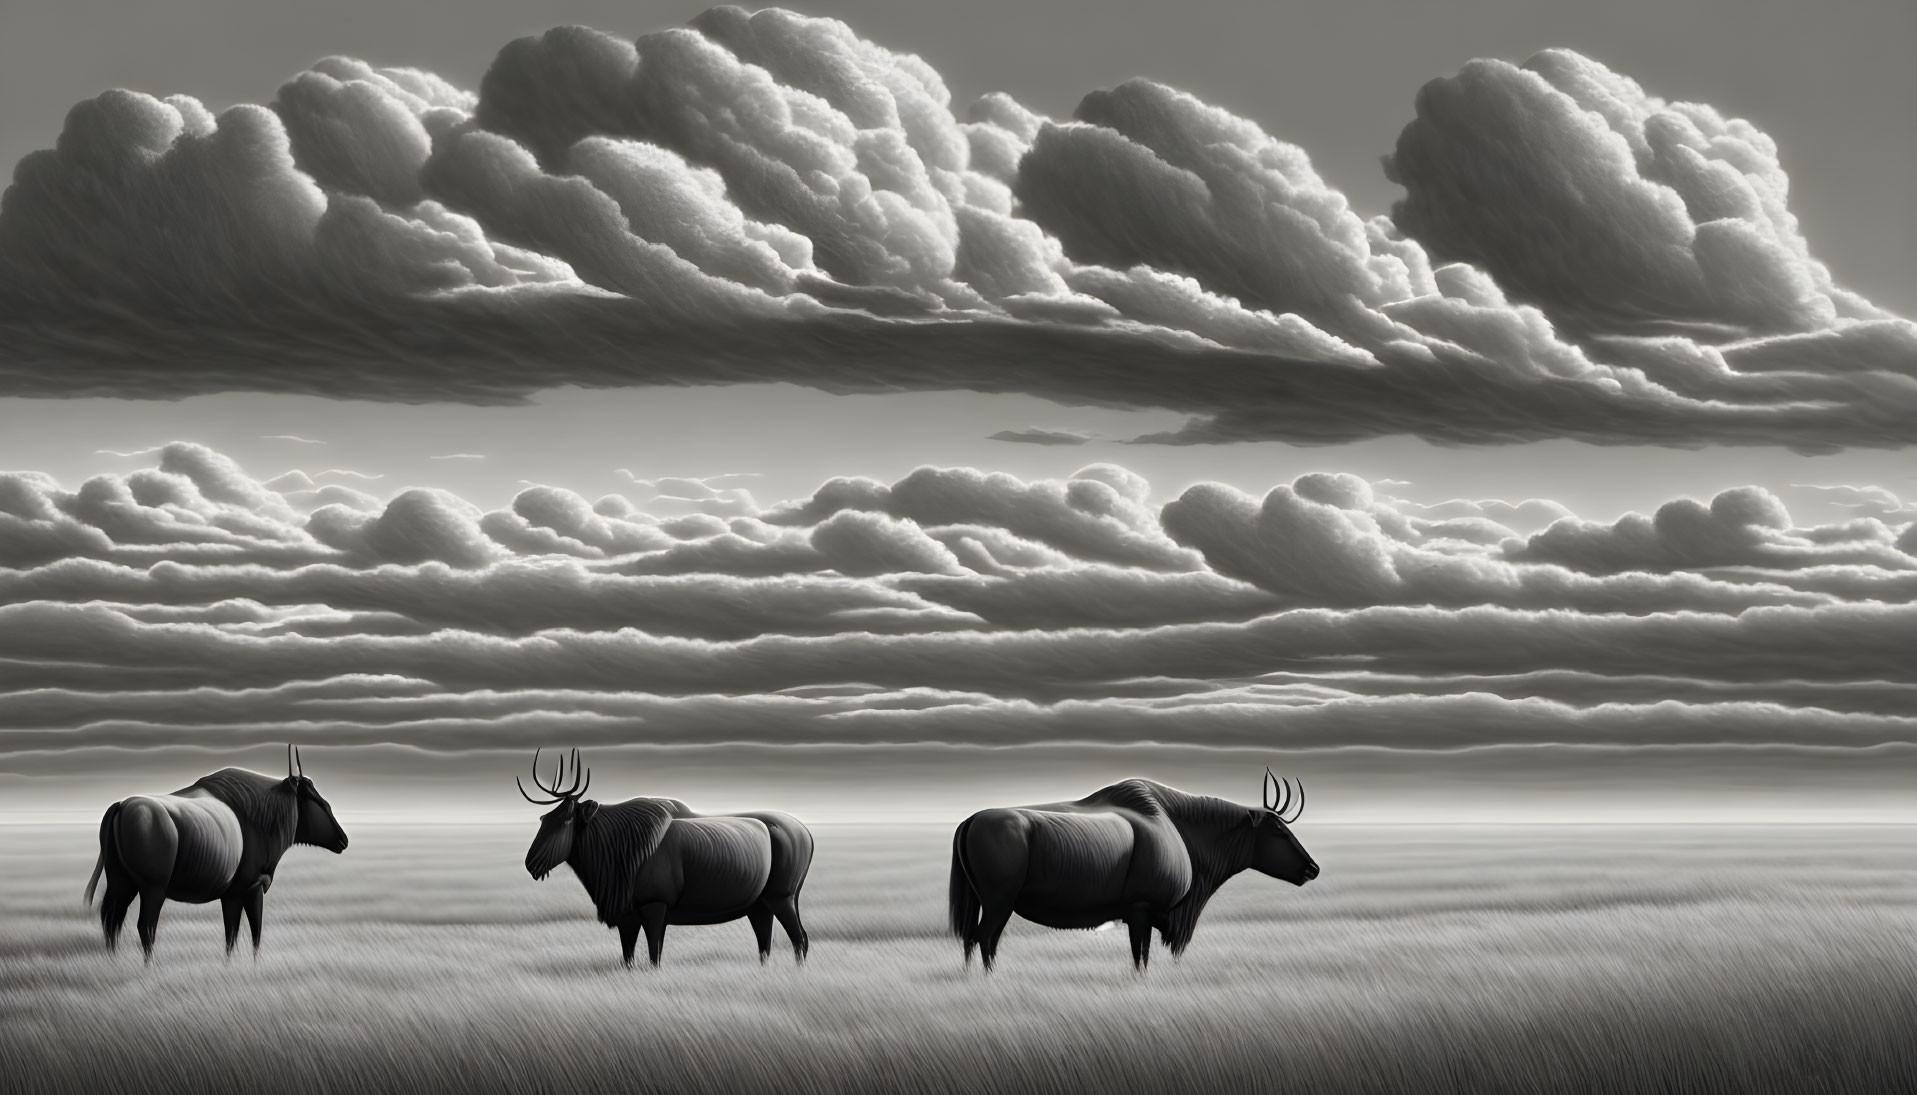 Grayscale image: Three wildebeests in tall grass under dramatic sky